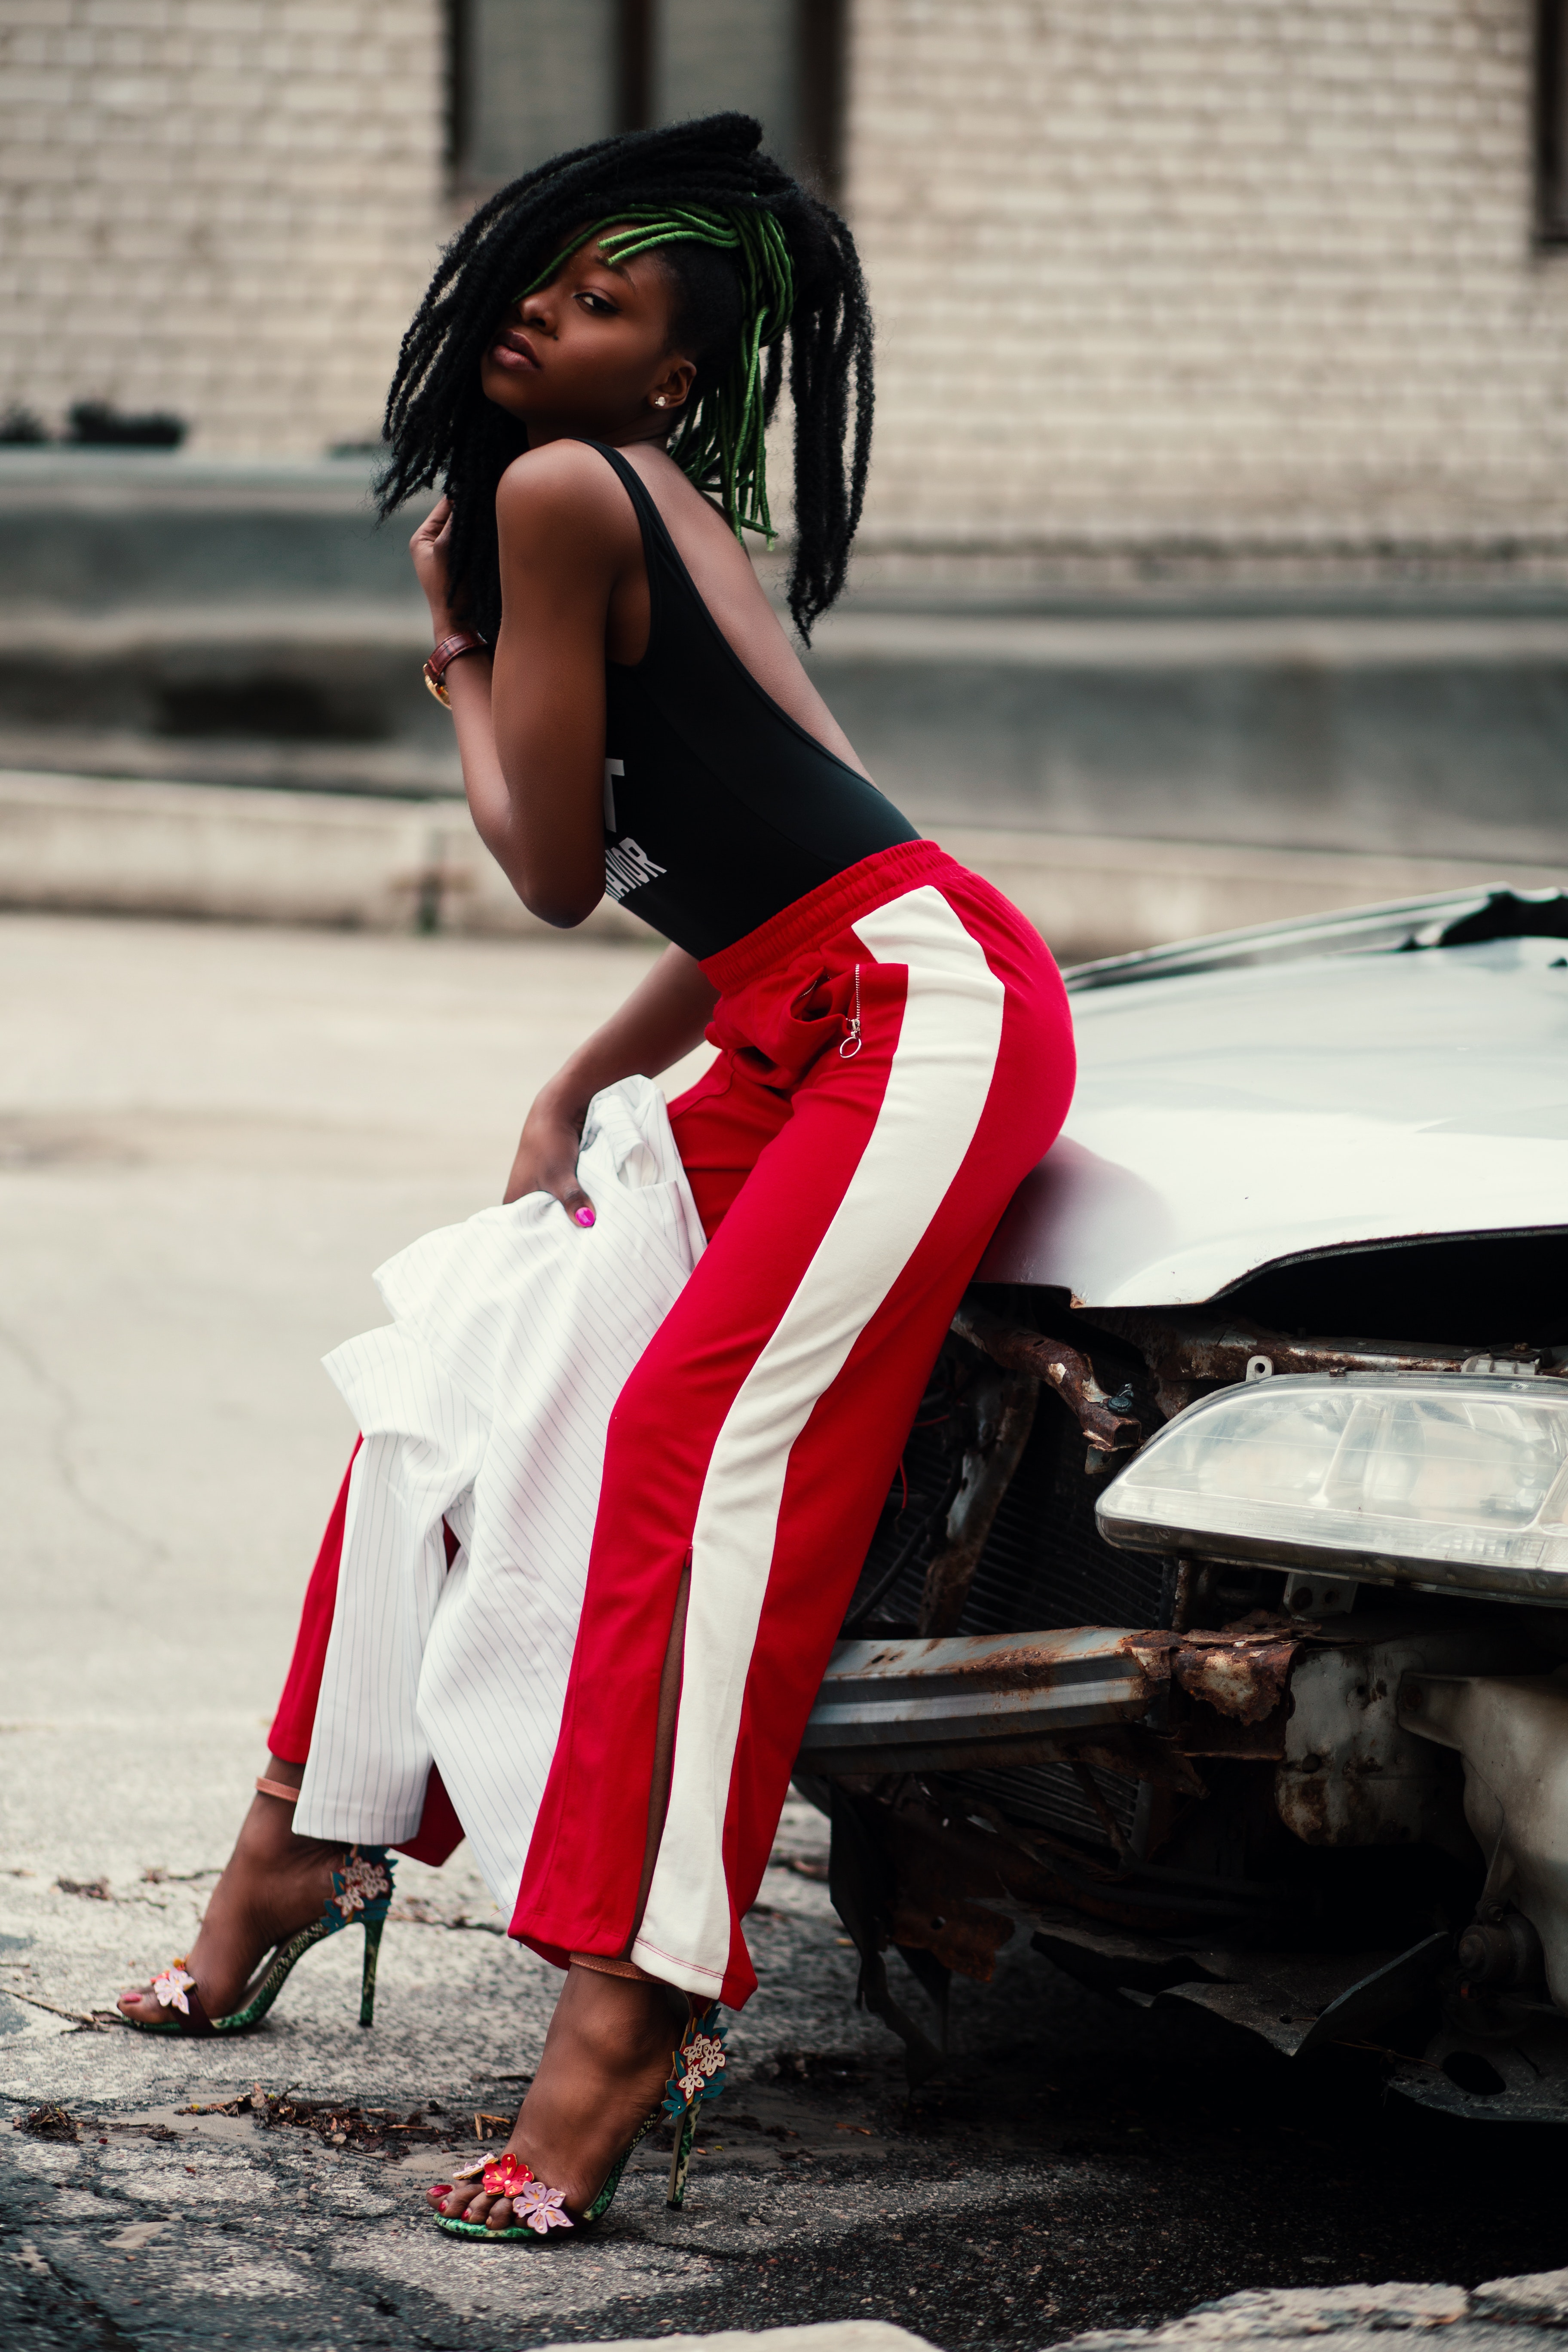 Women's wearing black backless top with red and white pants photo